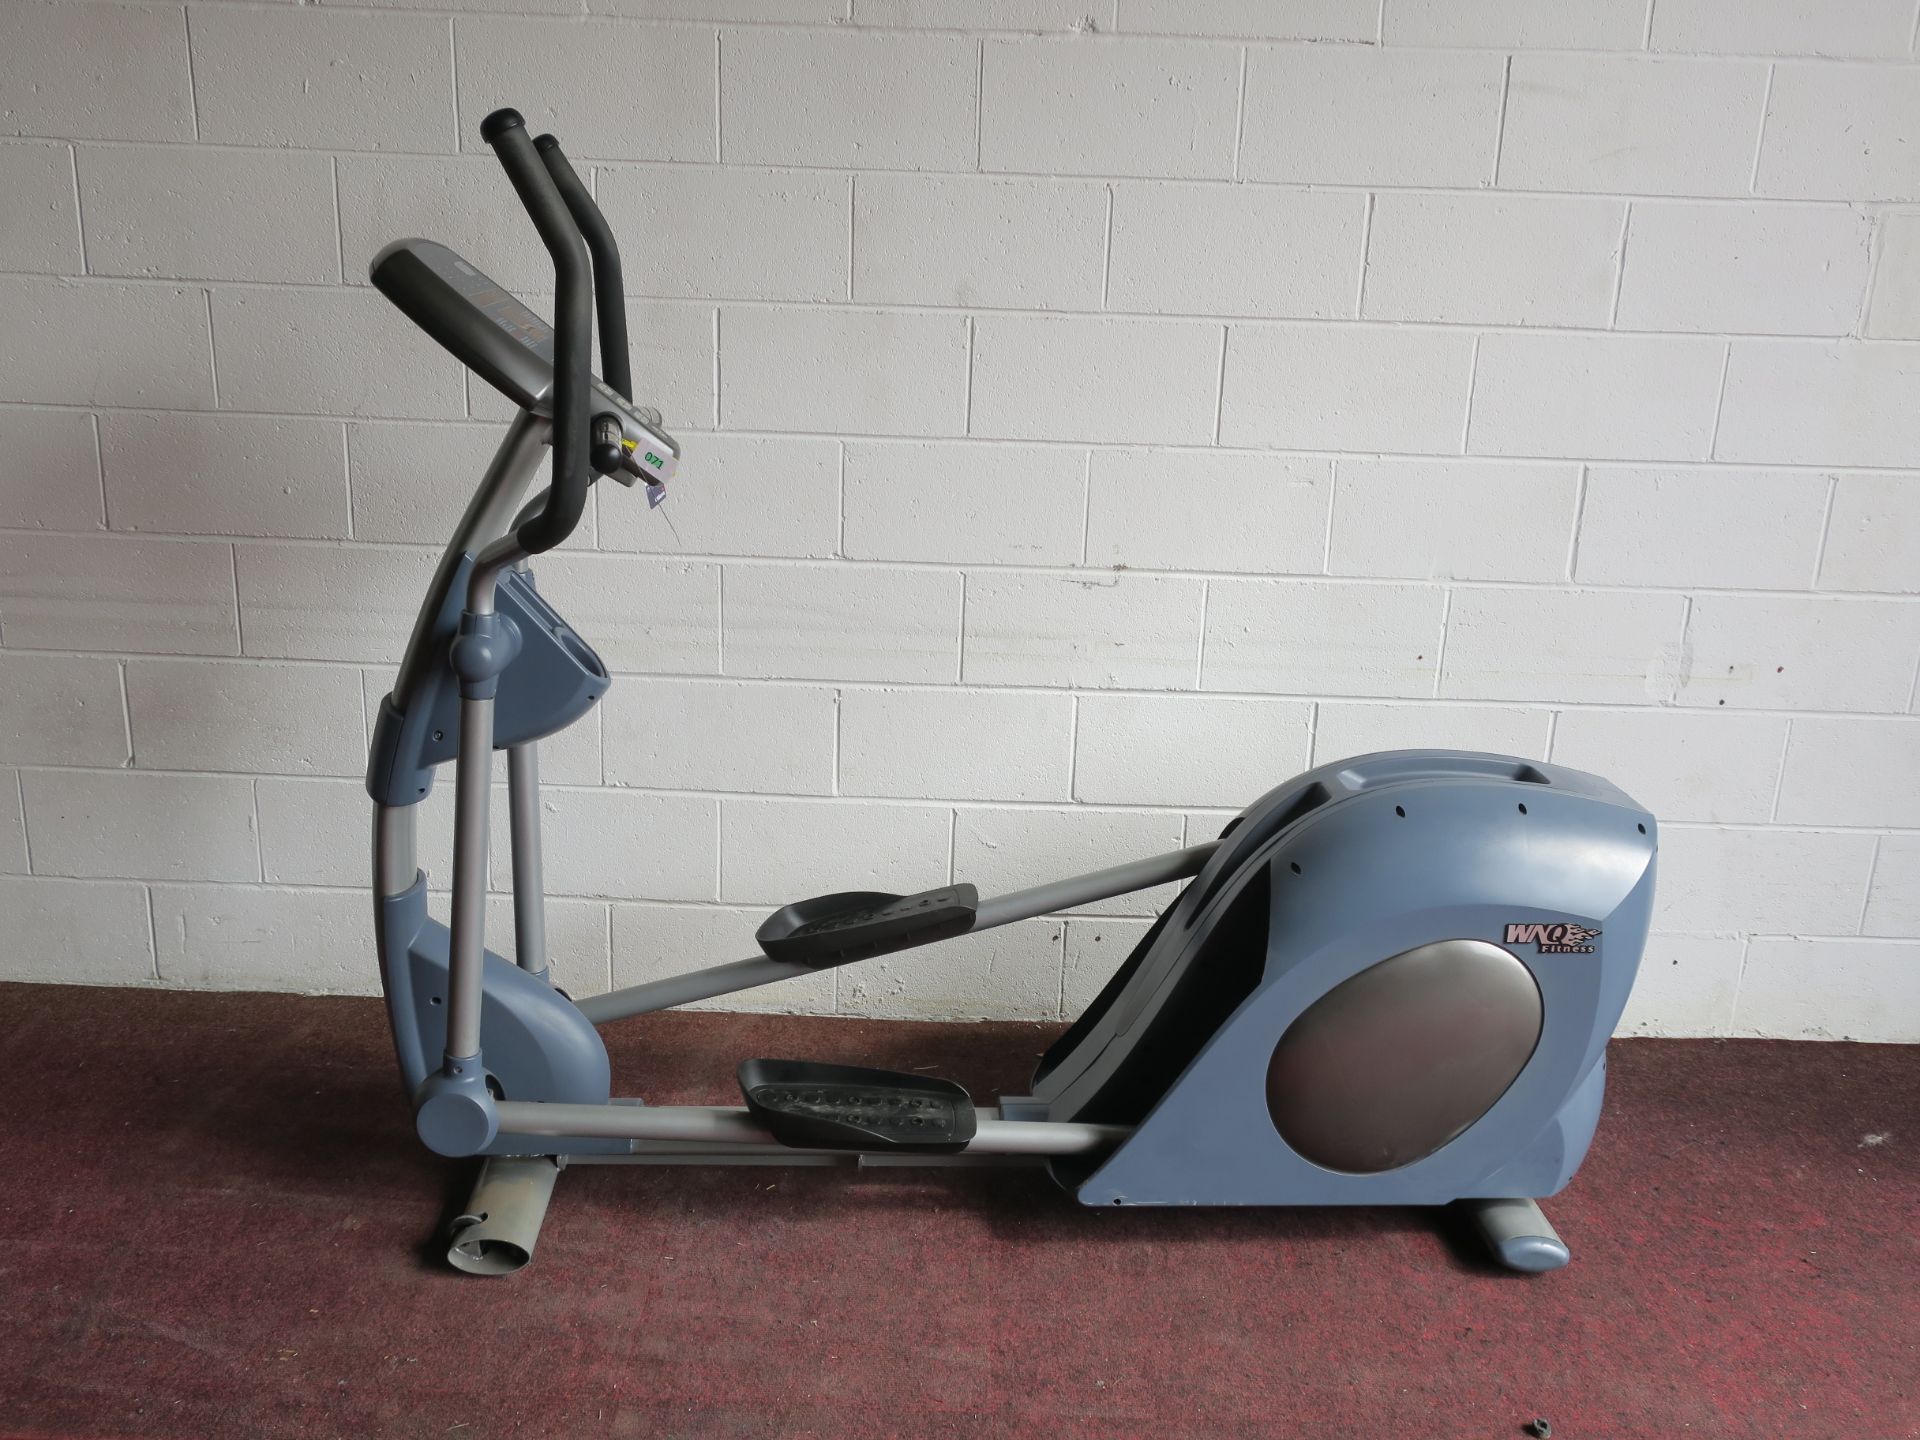 * A WNQ Fitness Eliptical Cross Trainer Model F1-8618A complete with heart rate monitor. Please note